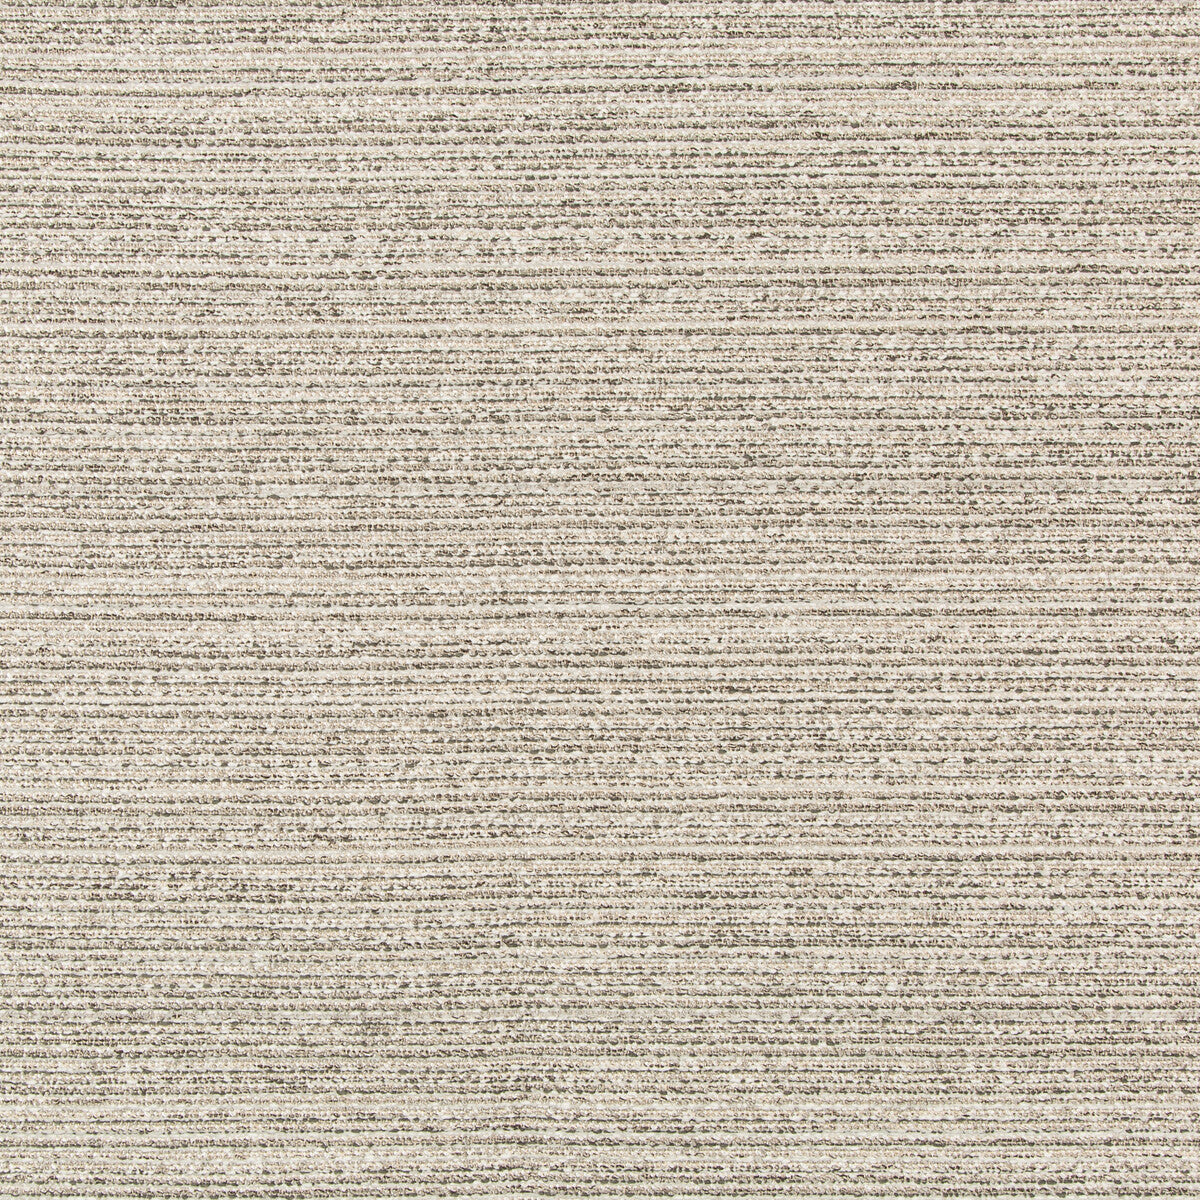 Kravet Design fabric in 36079-1101 color - pattern 36079.1101.0 - by Kravet Design in the Inside Out Performance Fabrics collection